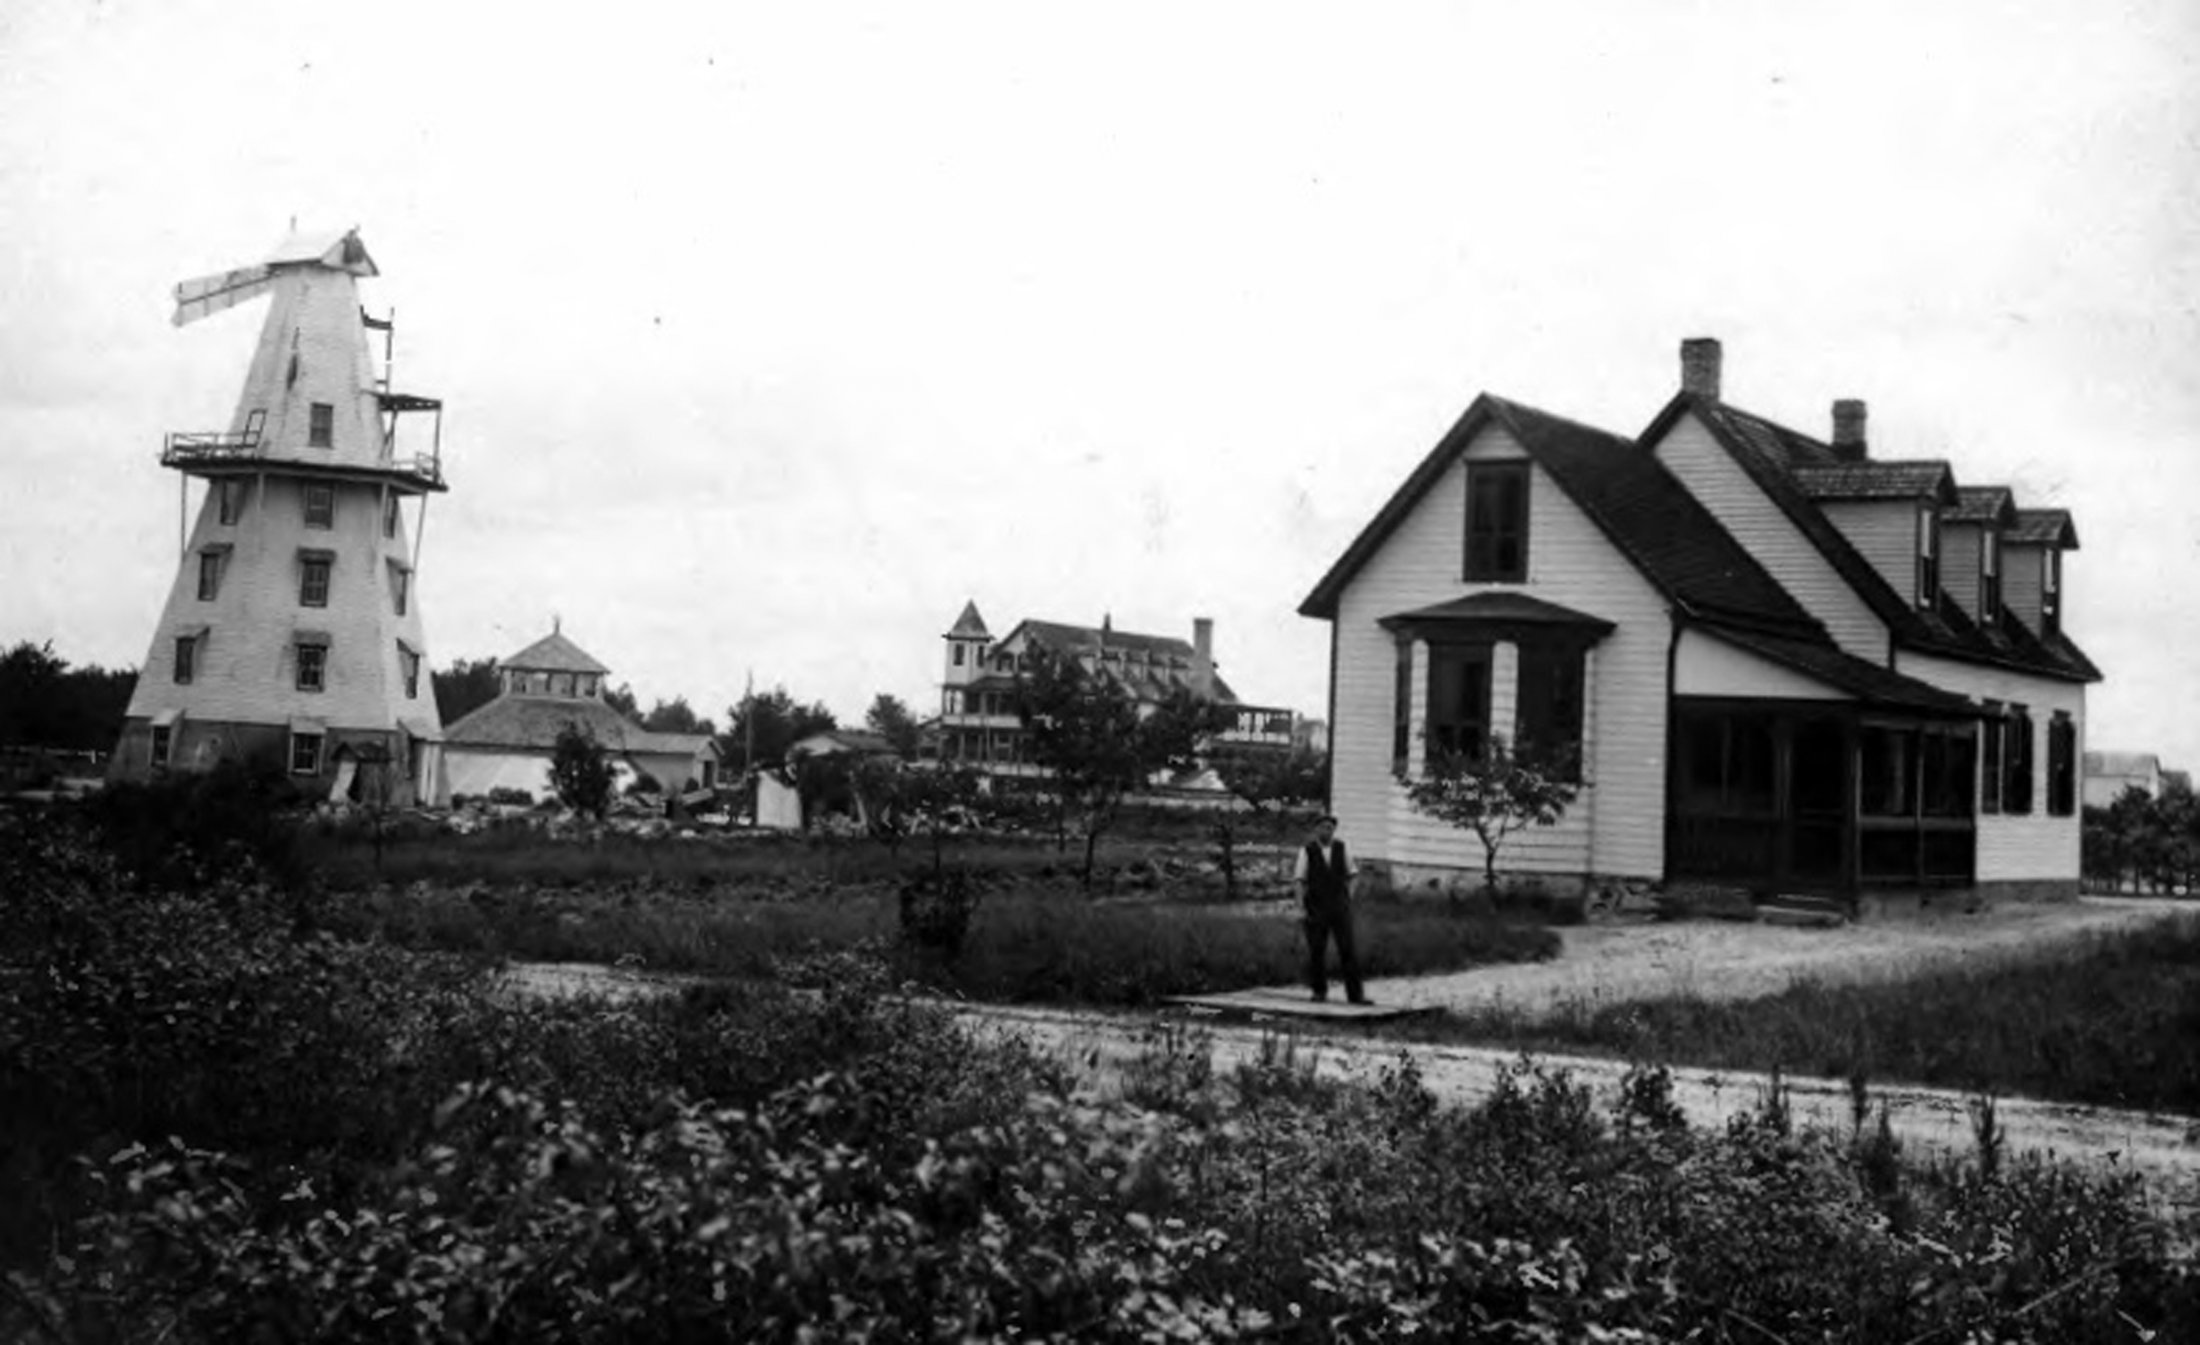 Egg Harbor City - Dr. Smith's house at 500 Washington Ave., Egg Harbor City. The hotel is clearly visible in the background, center. The building at the left may be a windmill- The man standing at the corner in front of the house is Lloyd Johnson